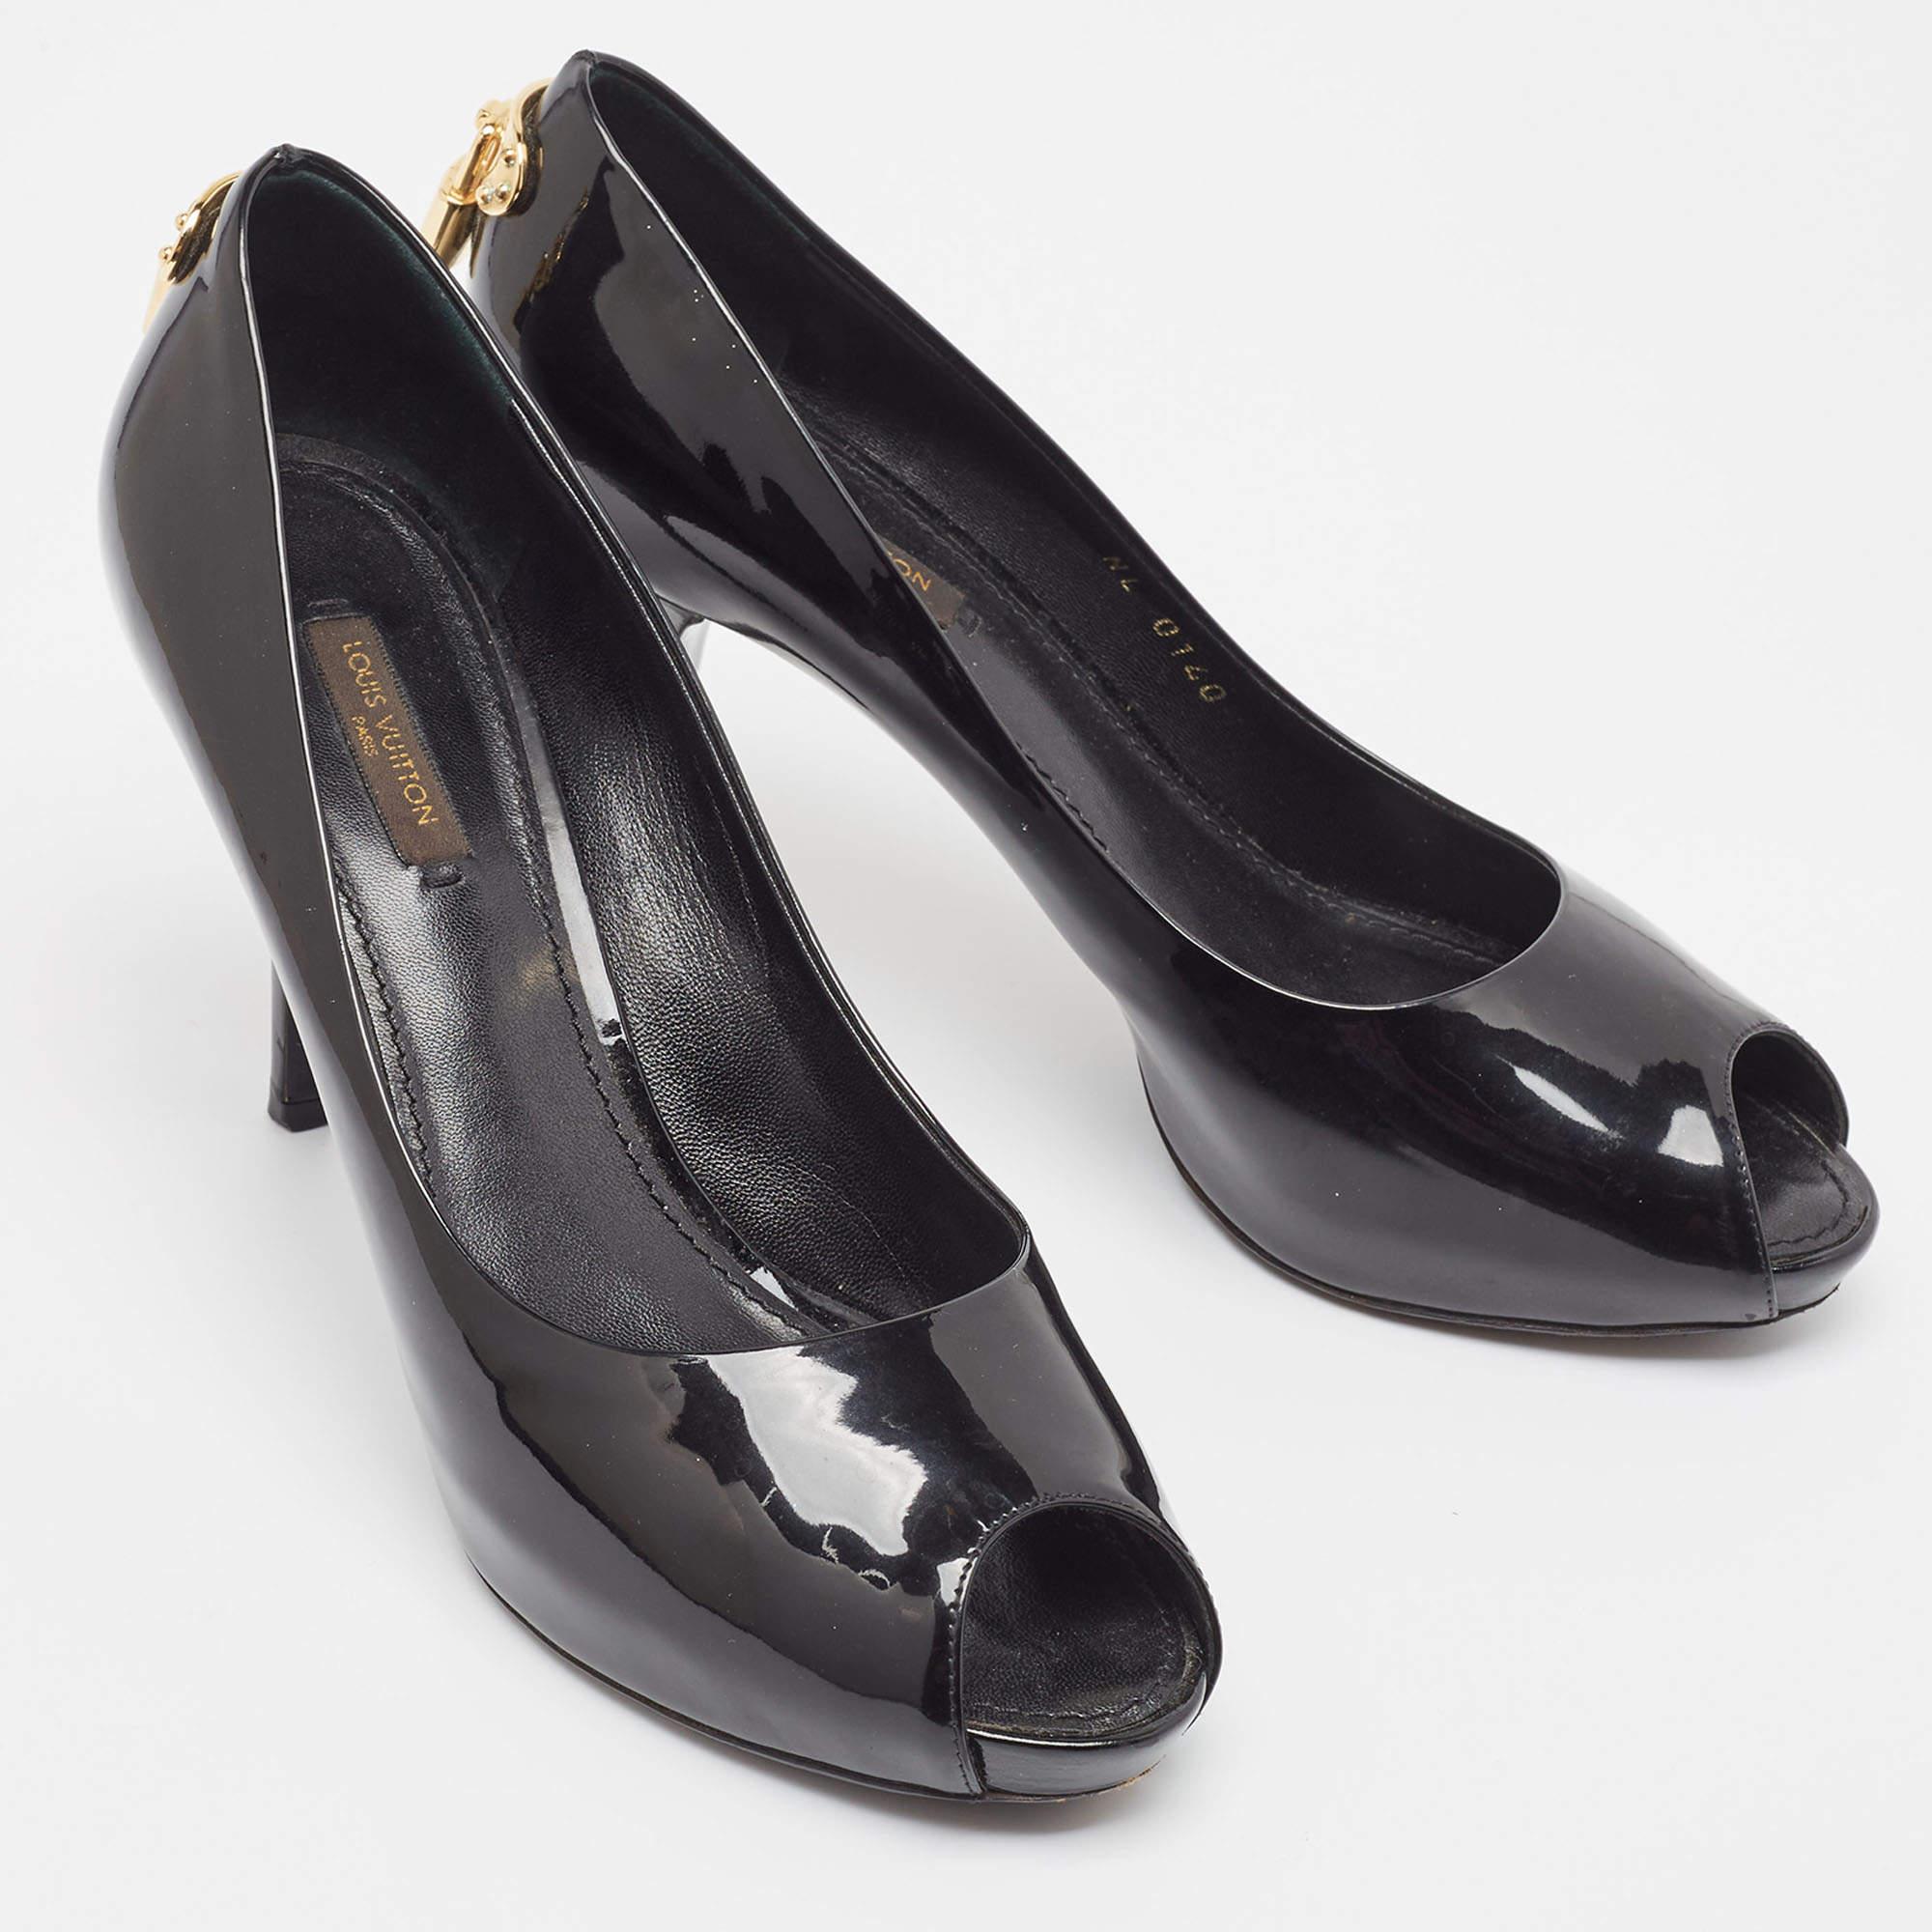 Louis Vuitton Black Patent Leather Oh Really! Pumps Size 38.5 For Sale 1